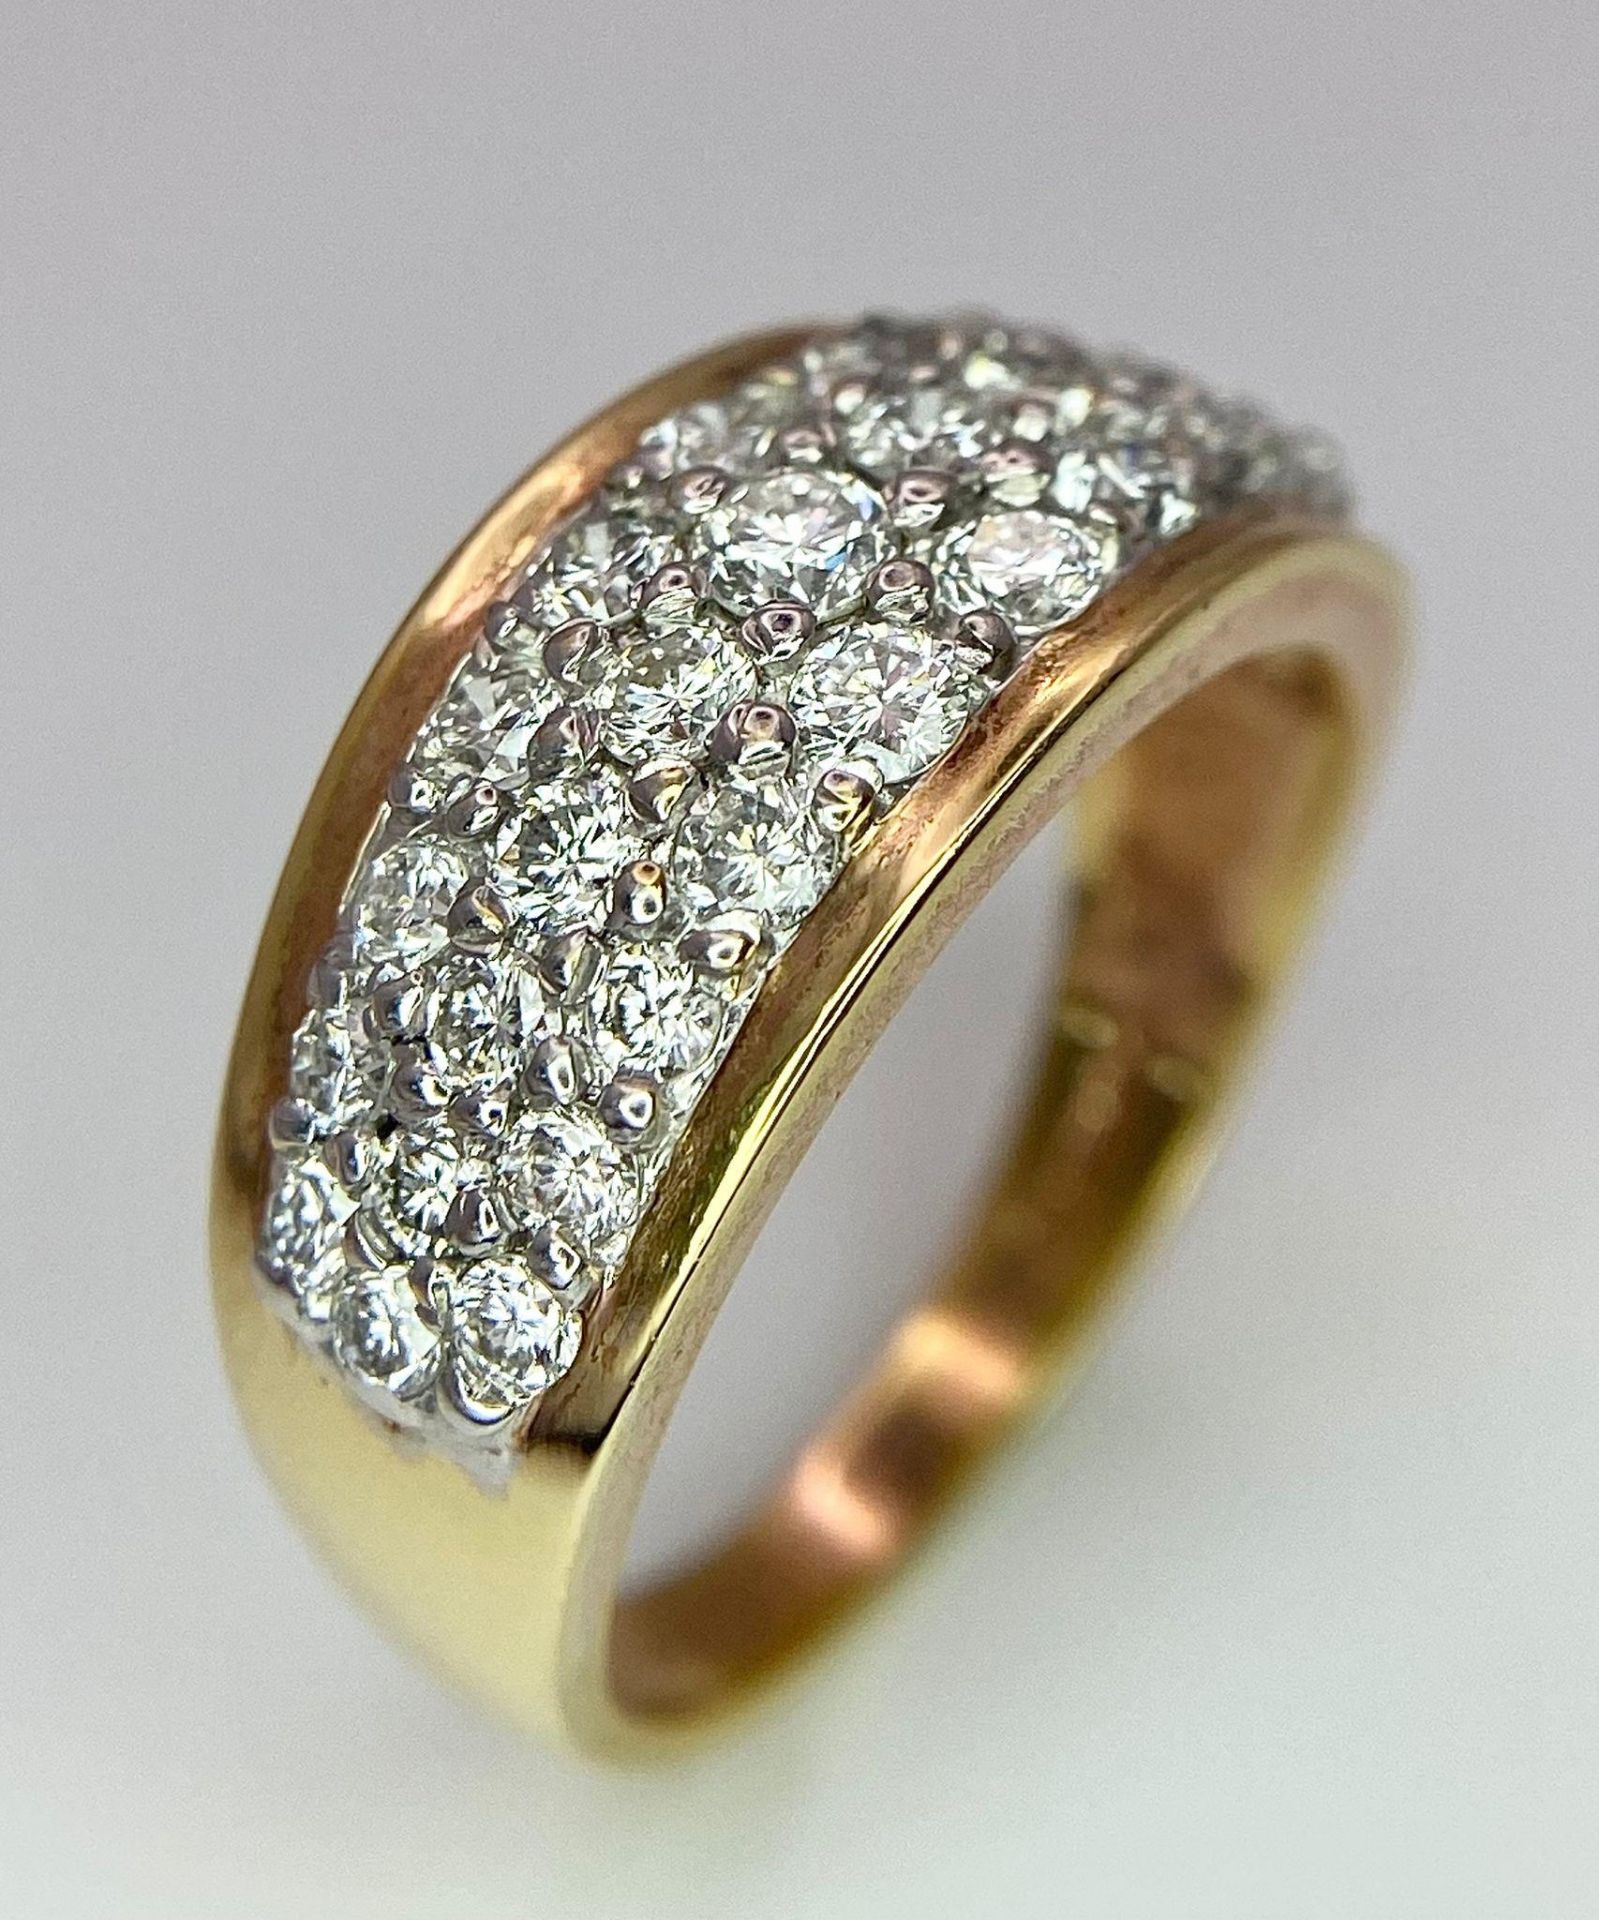 An 18K Yellow Gold Three-Row Cluster Ring. 1ctw. Size M. 5.5g total weight. - Image 2 of 15